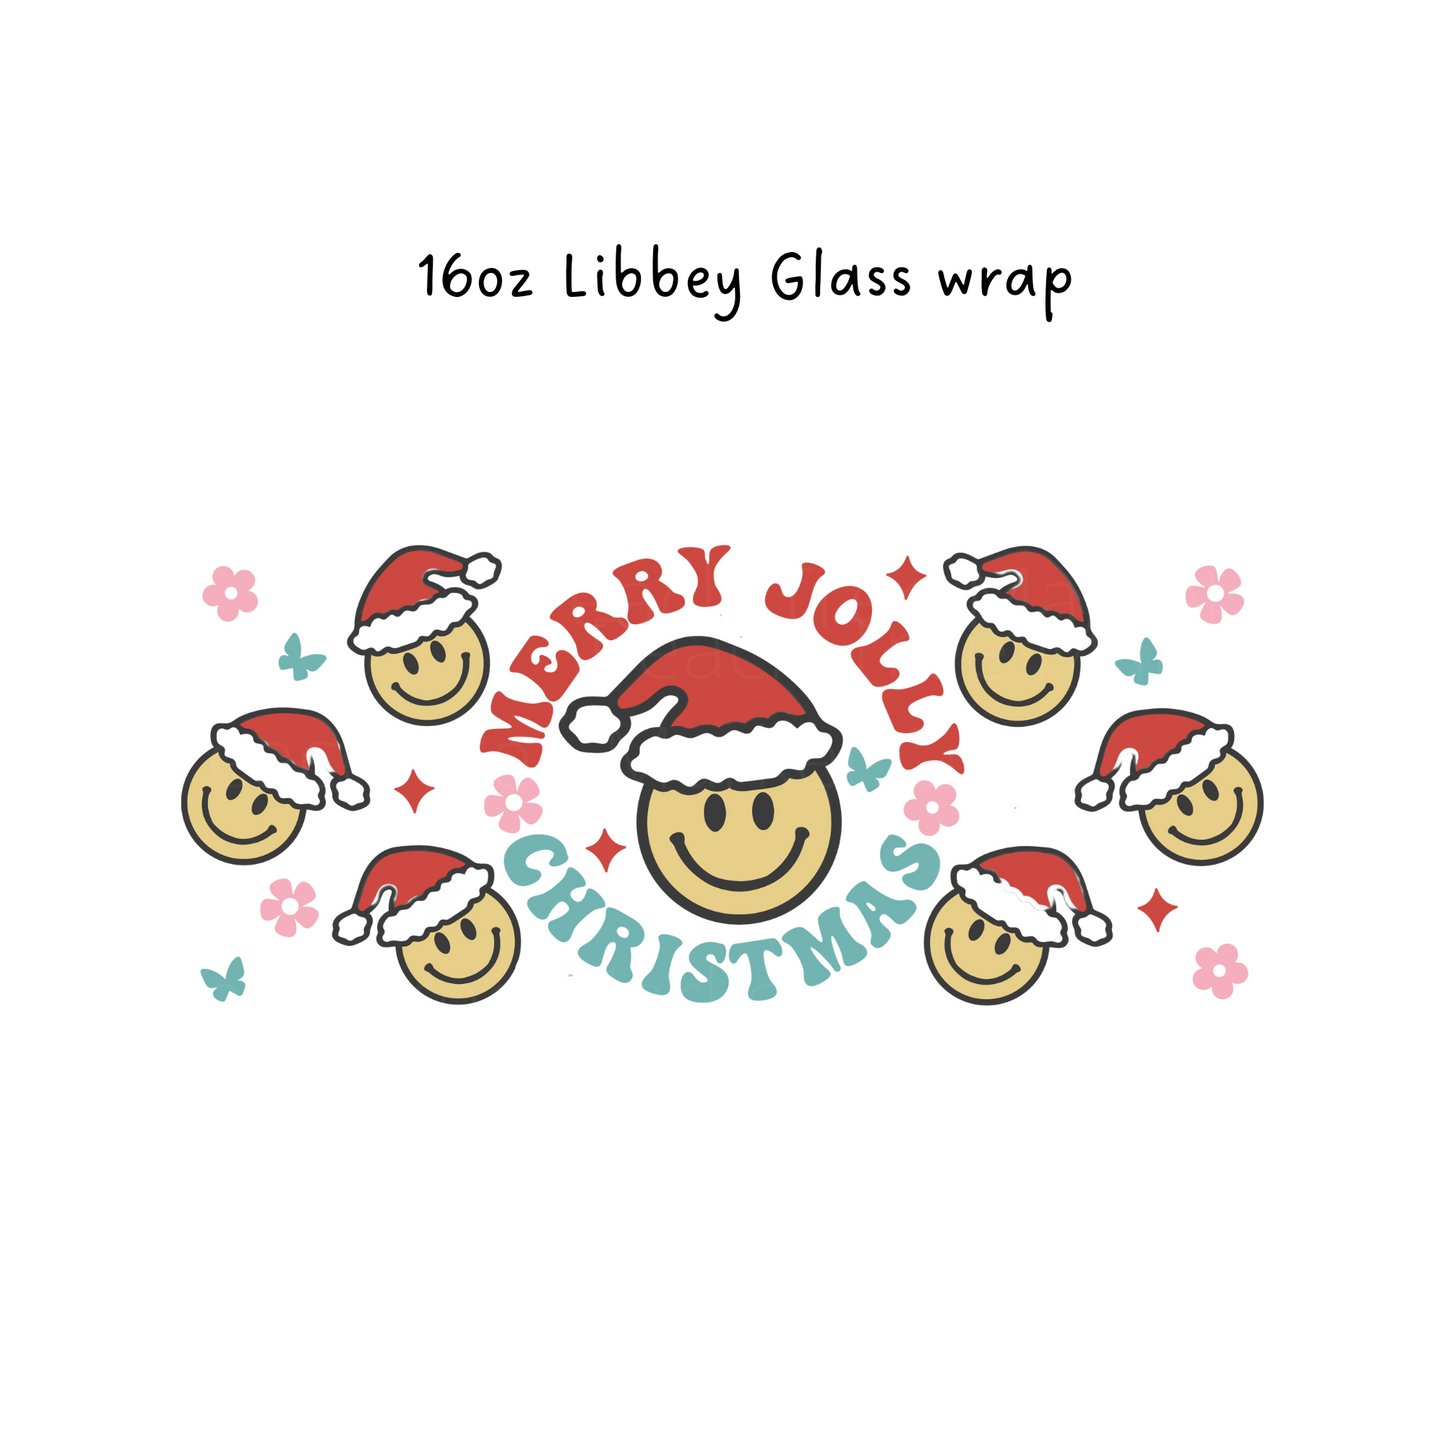 Merry Jolly Christmas 16 Oz Libbey Beer Glass Wrap